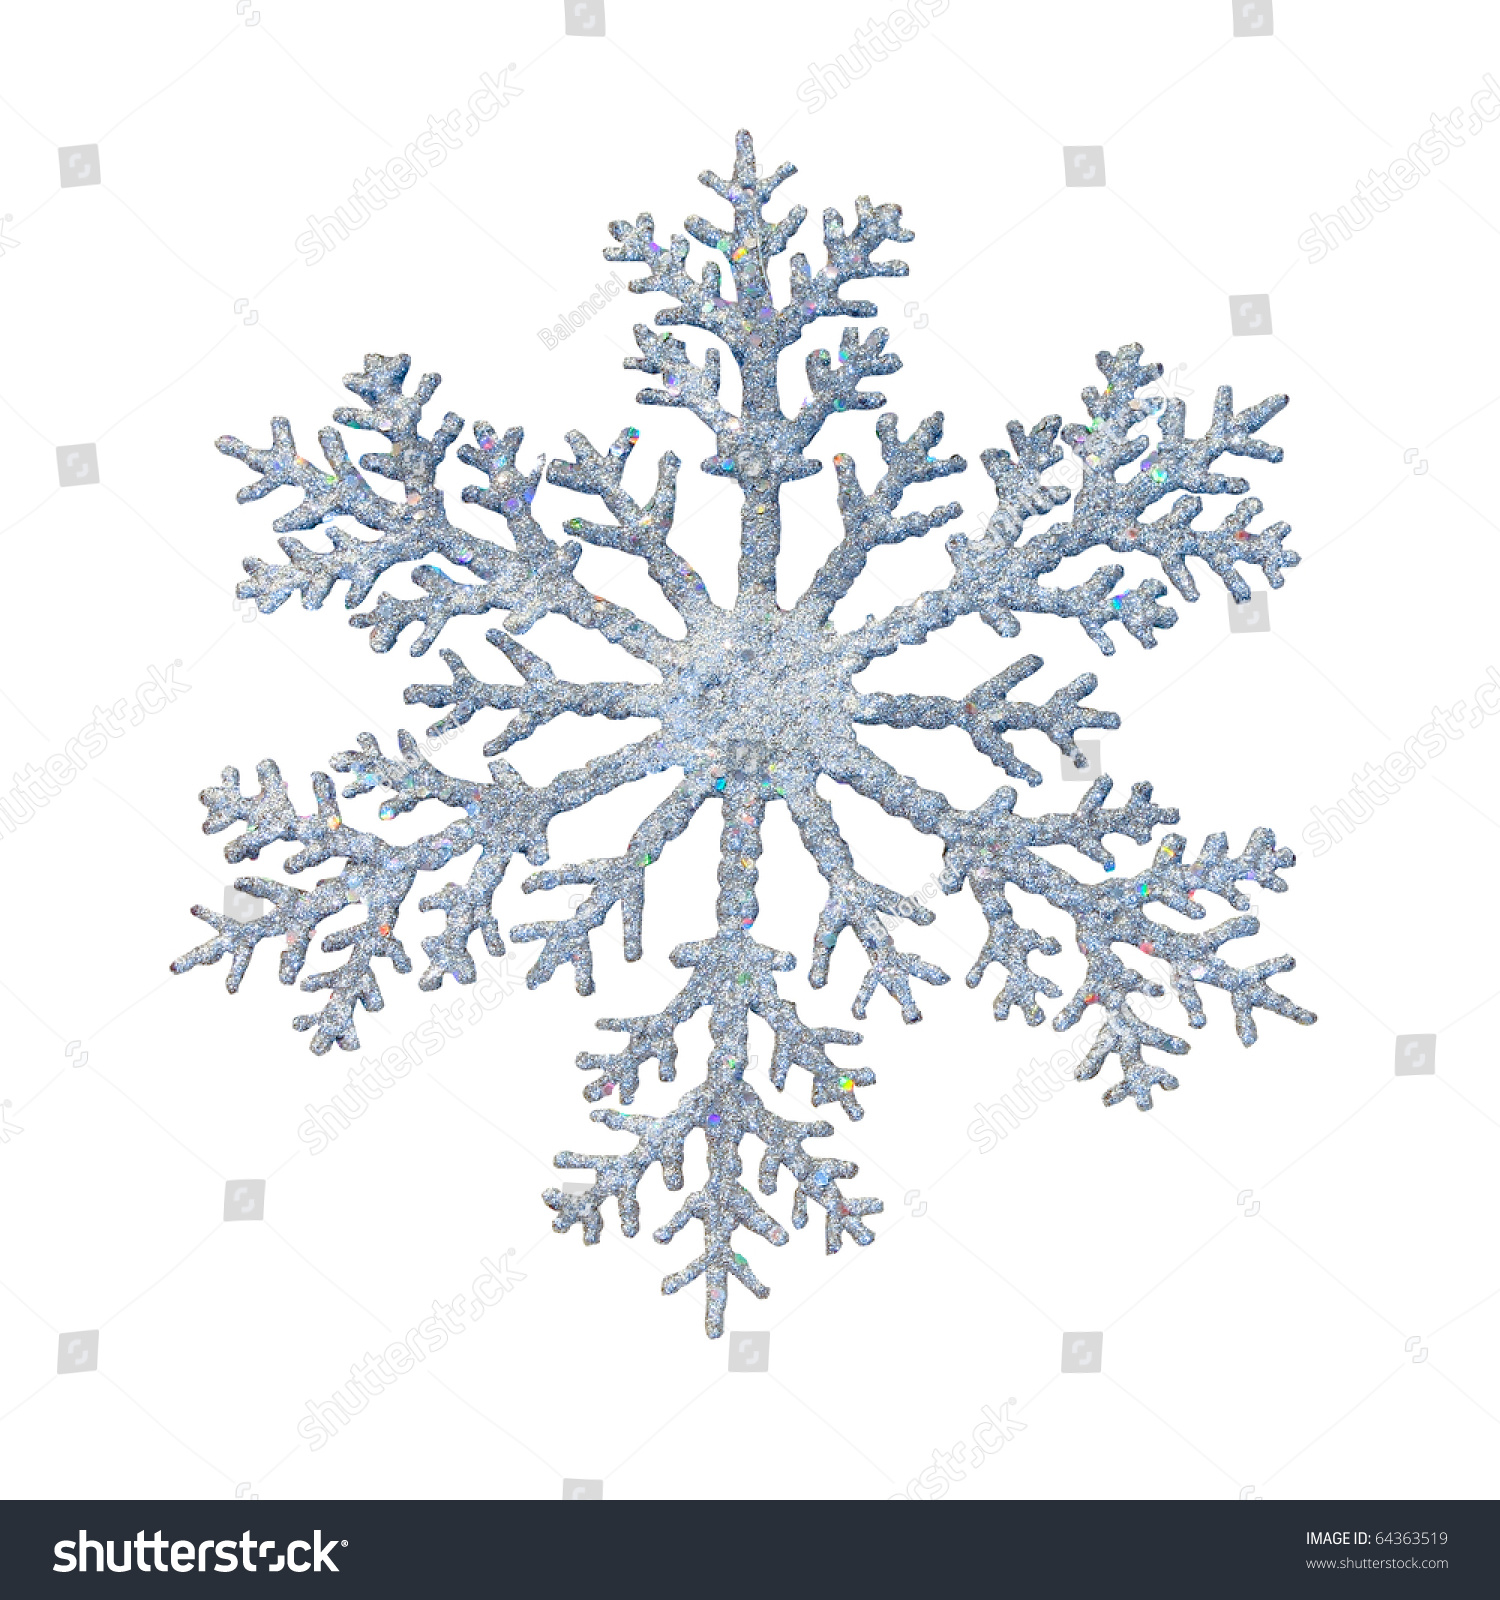 Snowflake shape decoration with clipping path included #64363519